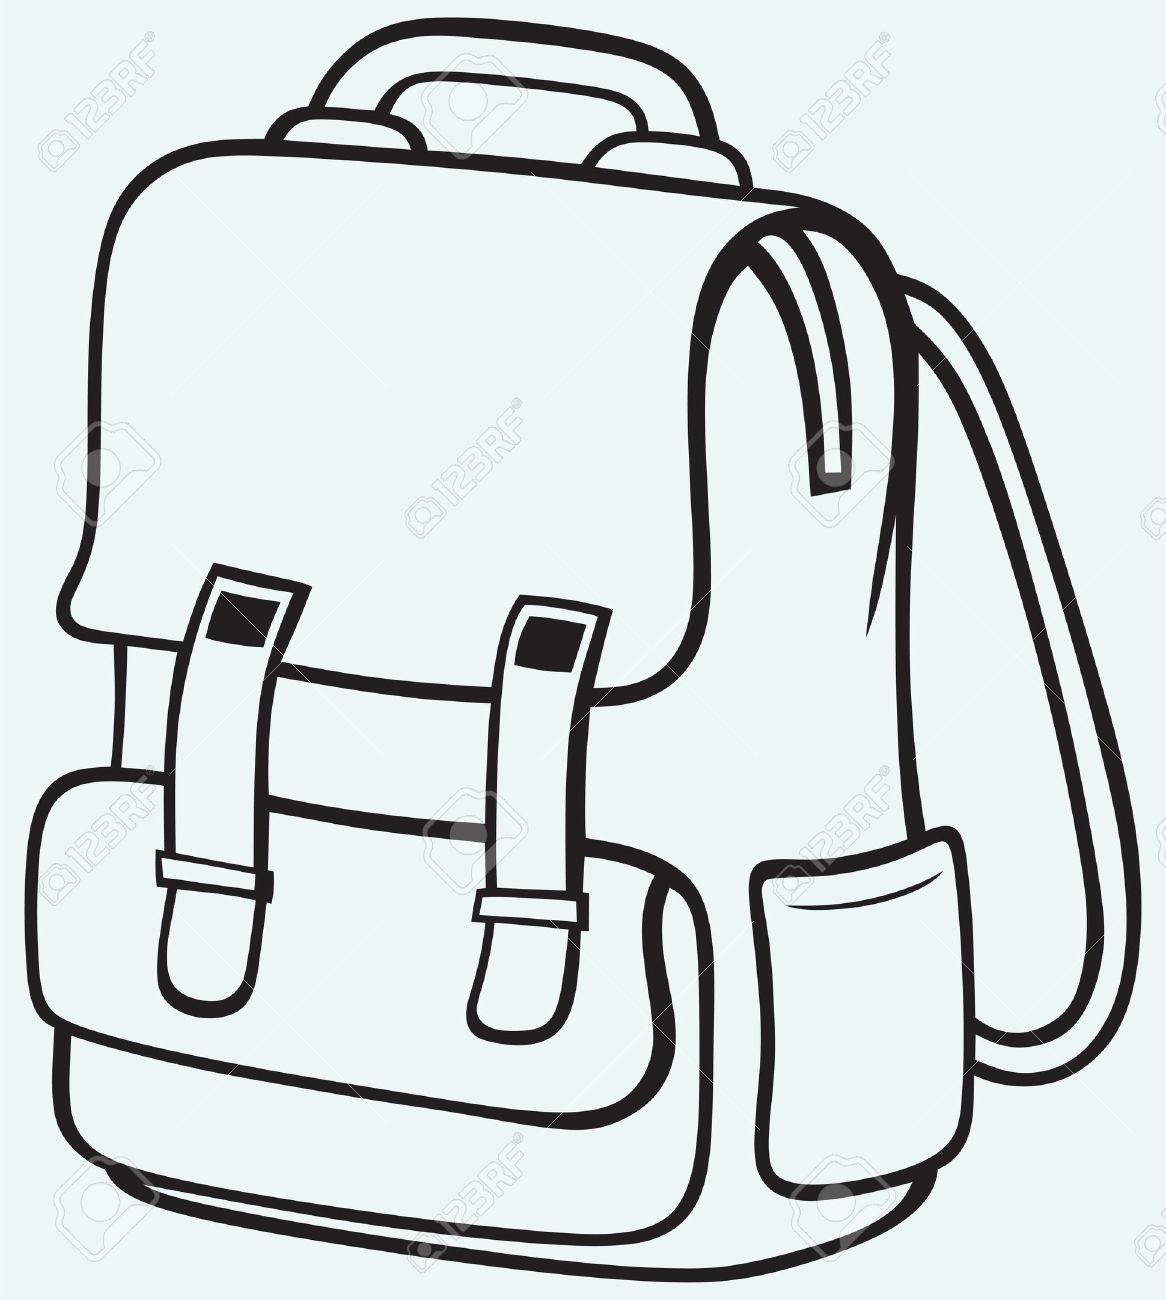 School bag clipart black and white